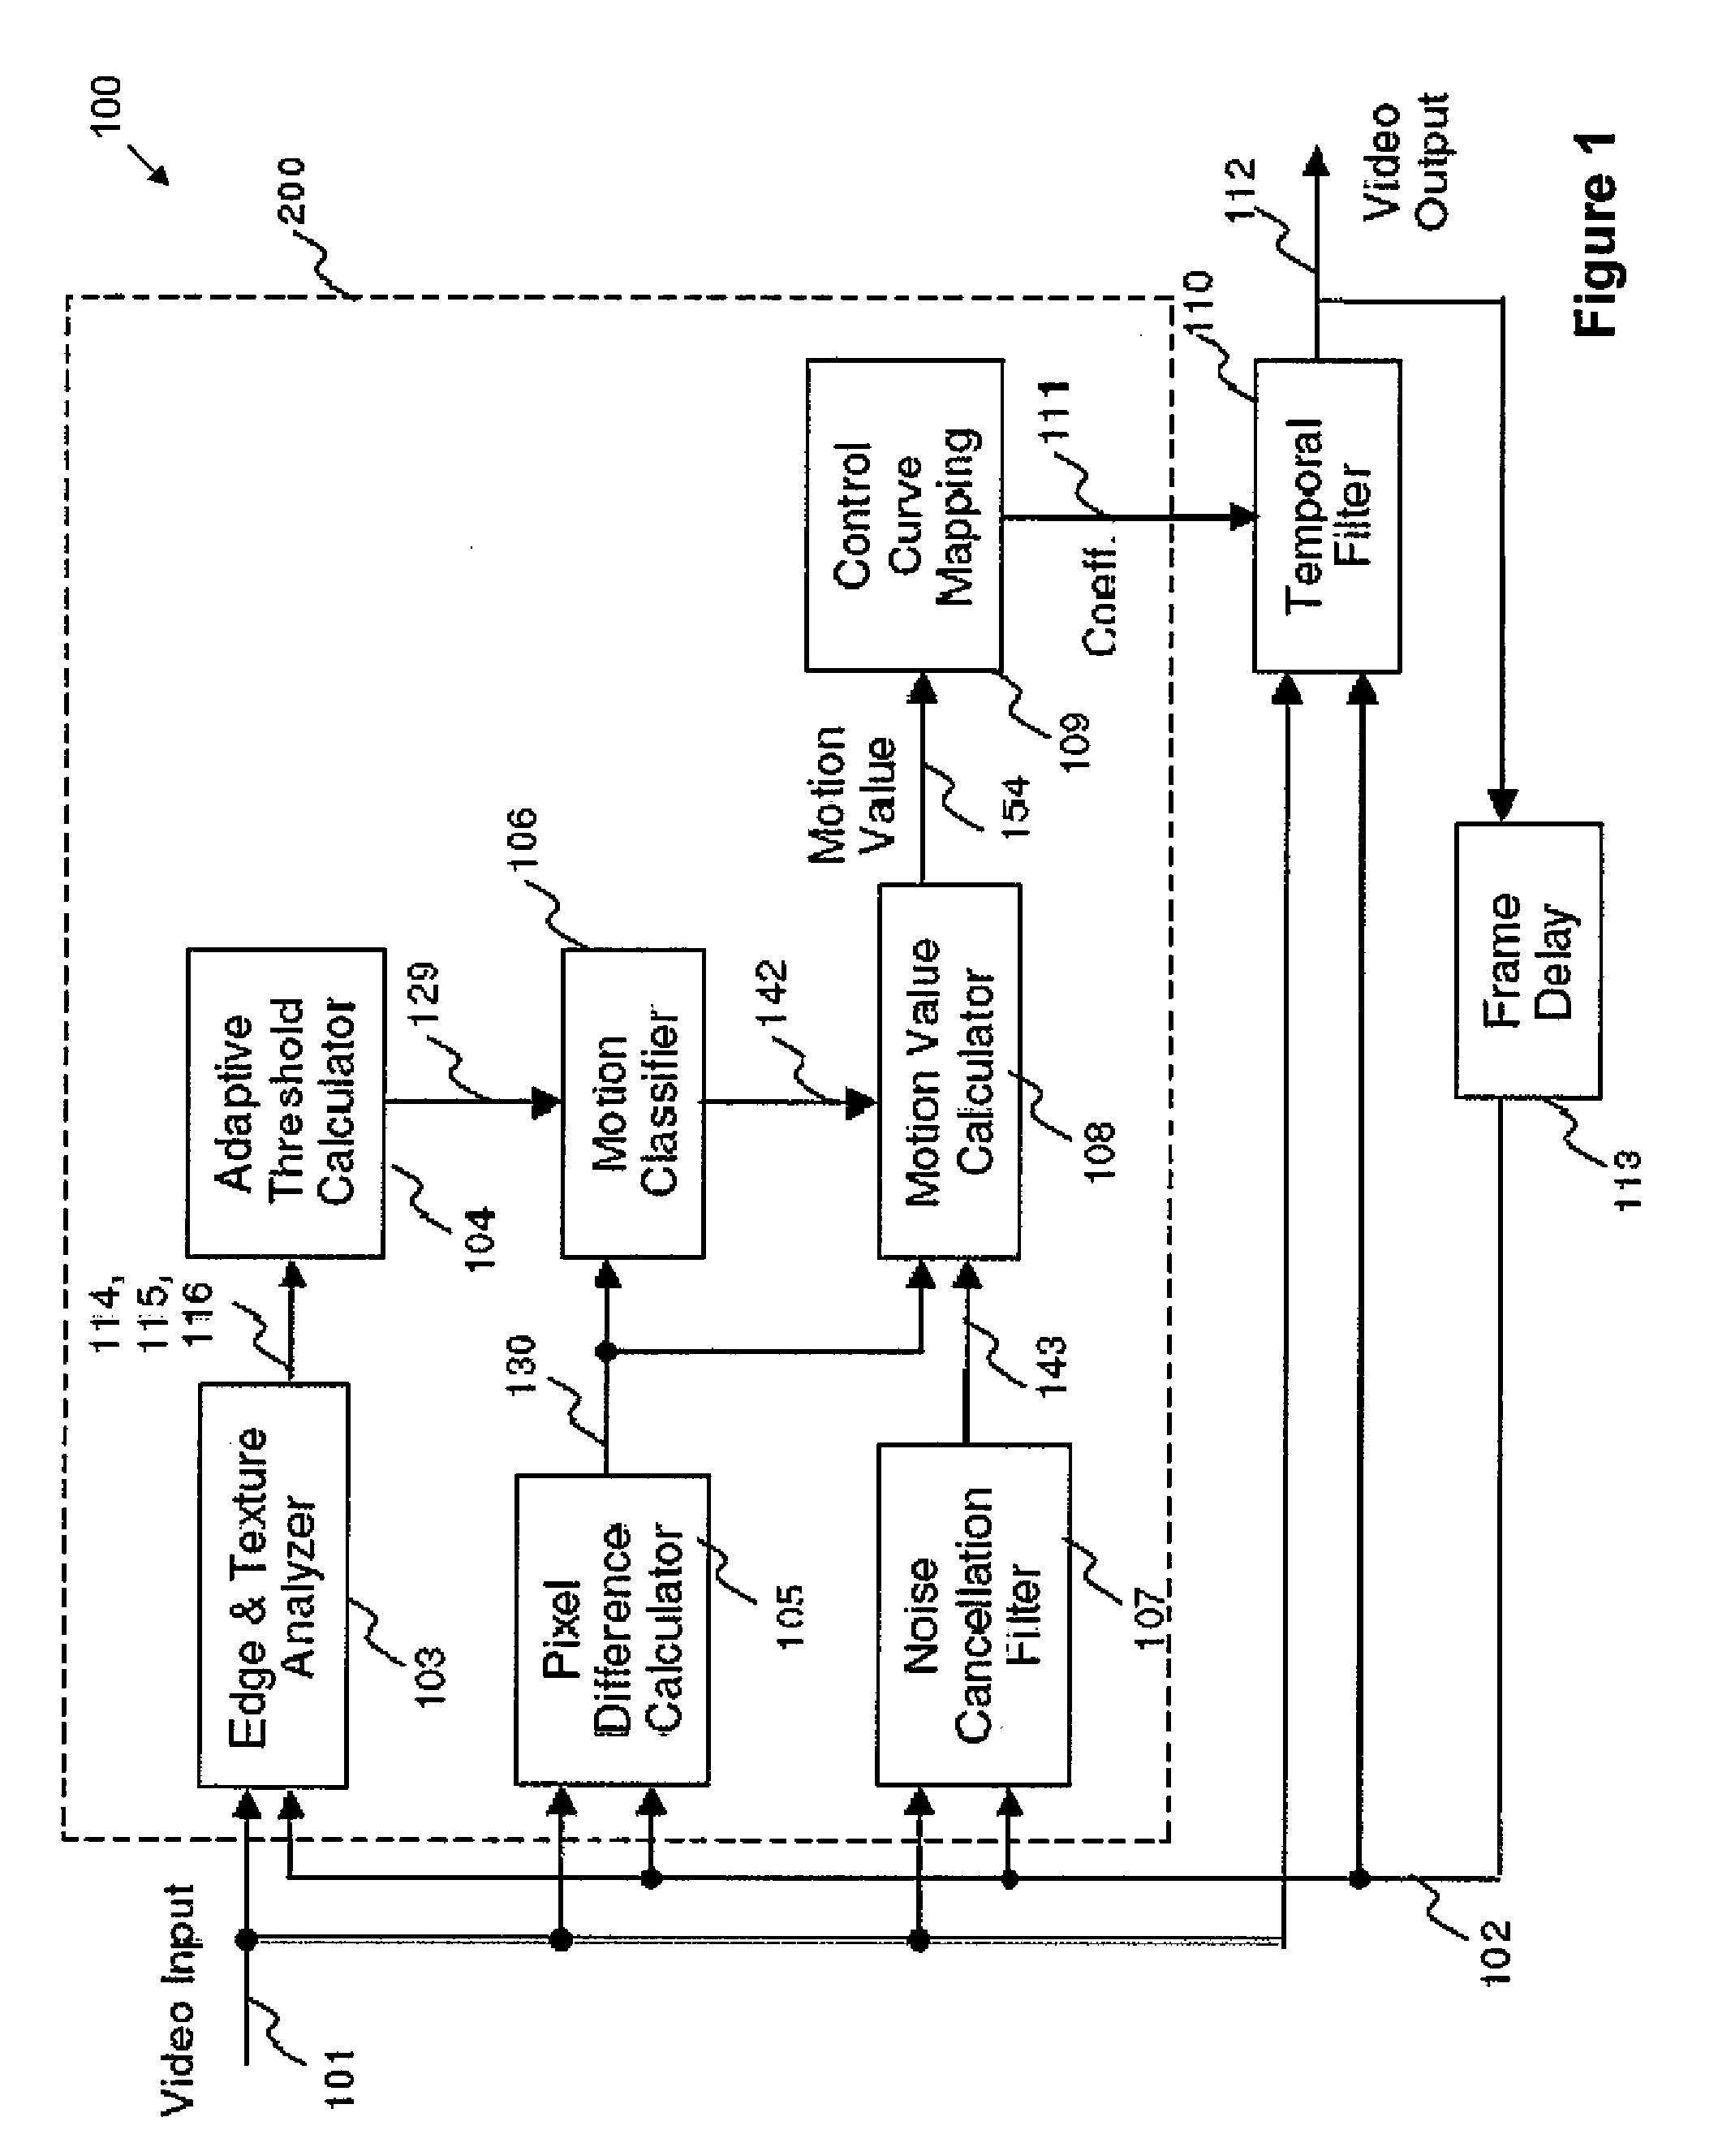 Apparatus and method of motion detection for temporal mosquito noise reduction in video sequences